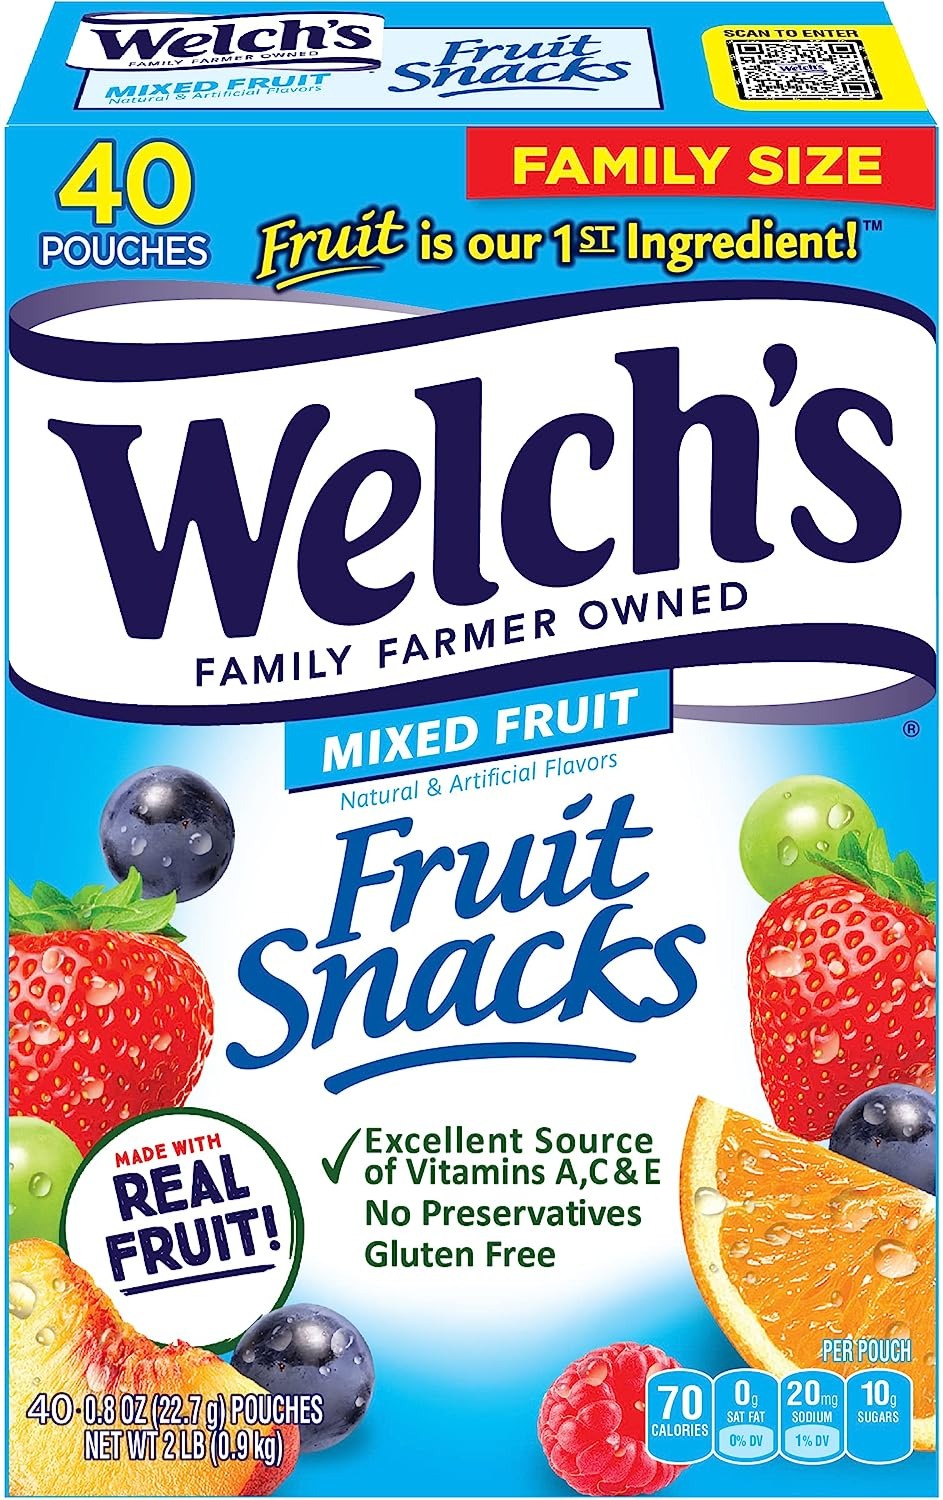 $6.36 w/ S&S: 40-Count 0.8-Oz Welch's Mixed Fruit Snacks